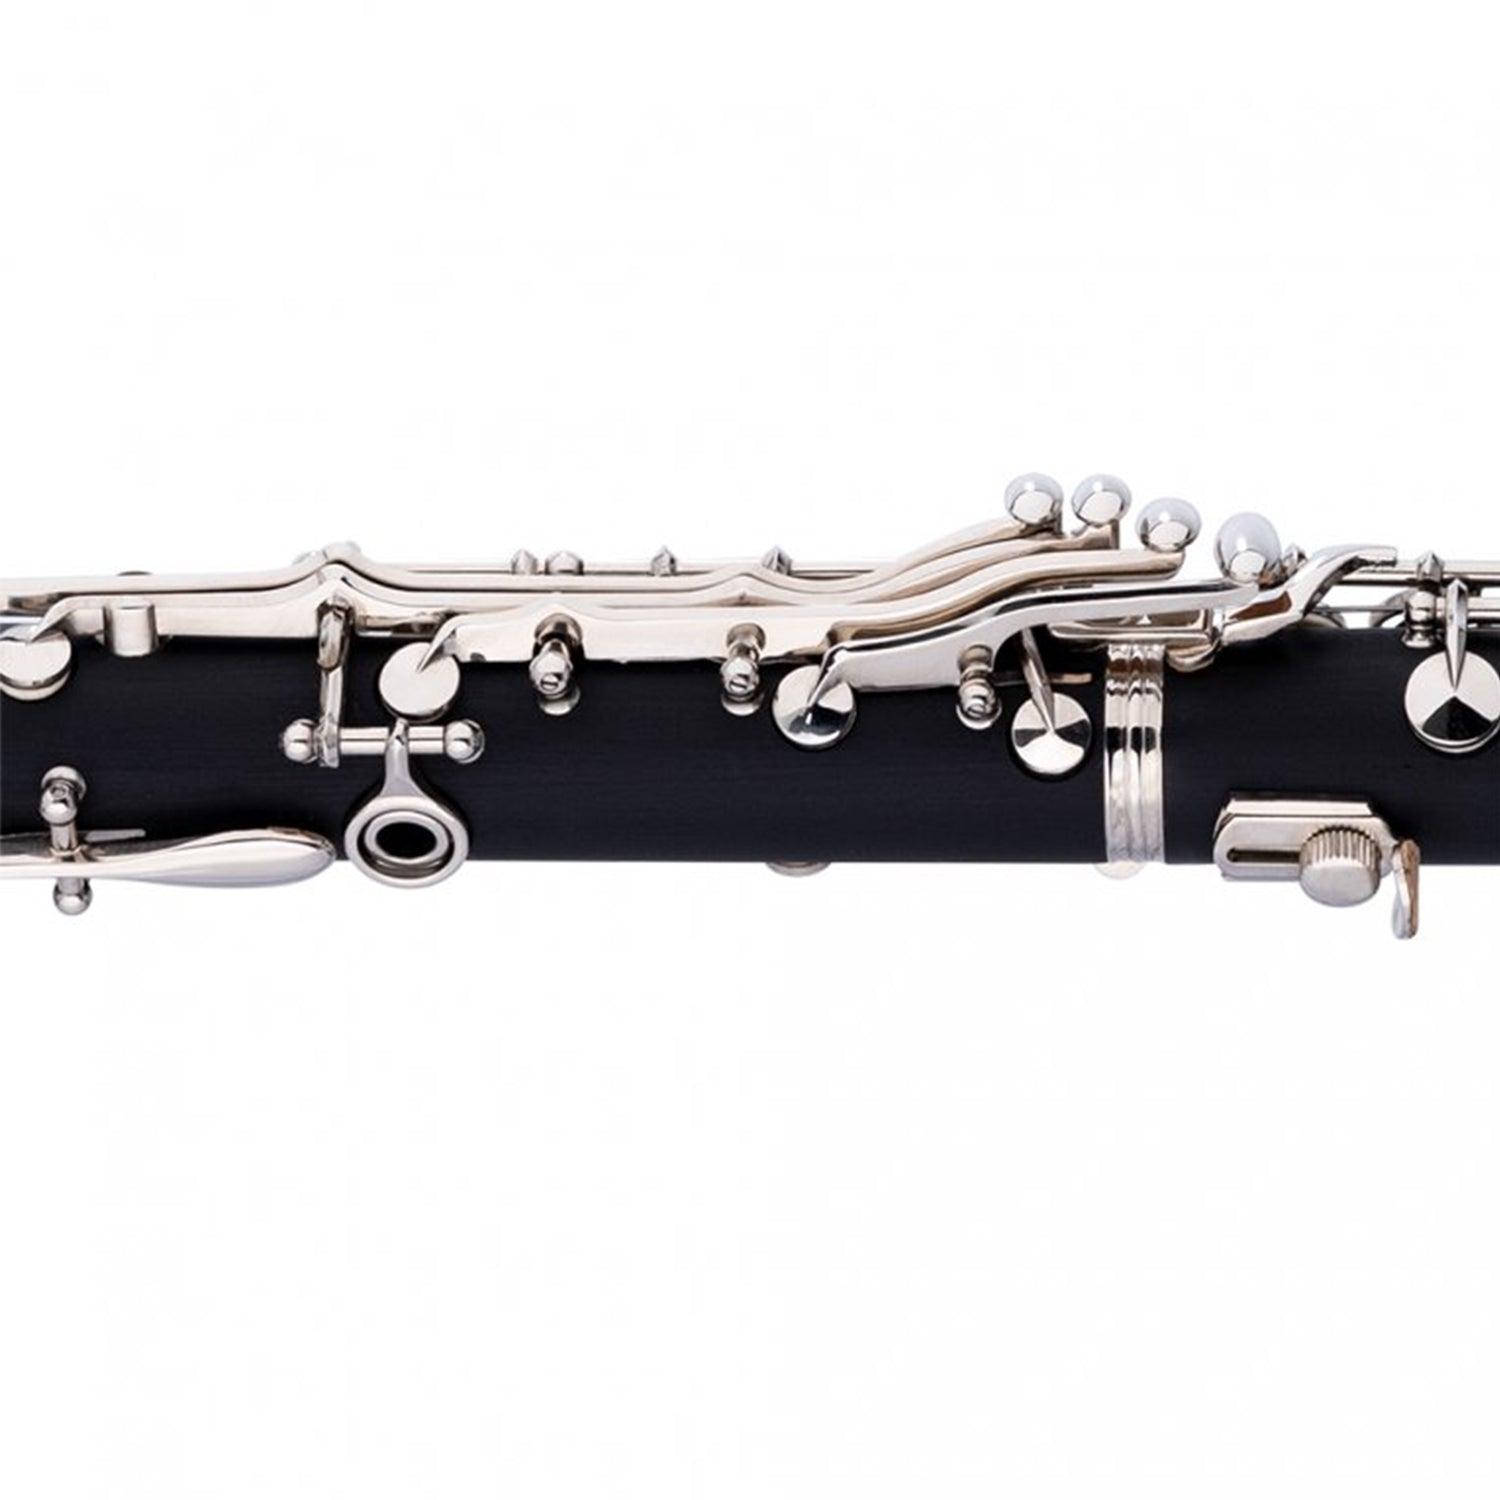 Stagg WS-CL210S Bb Clarinet Boehm system, ABS Body and Bickel-Plated Keys and Tings - DY Pro Audio